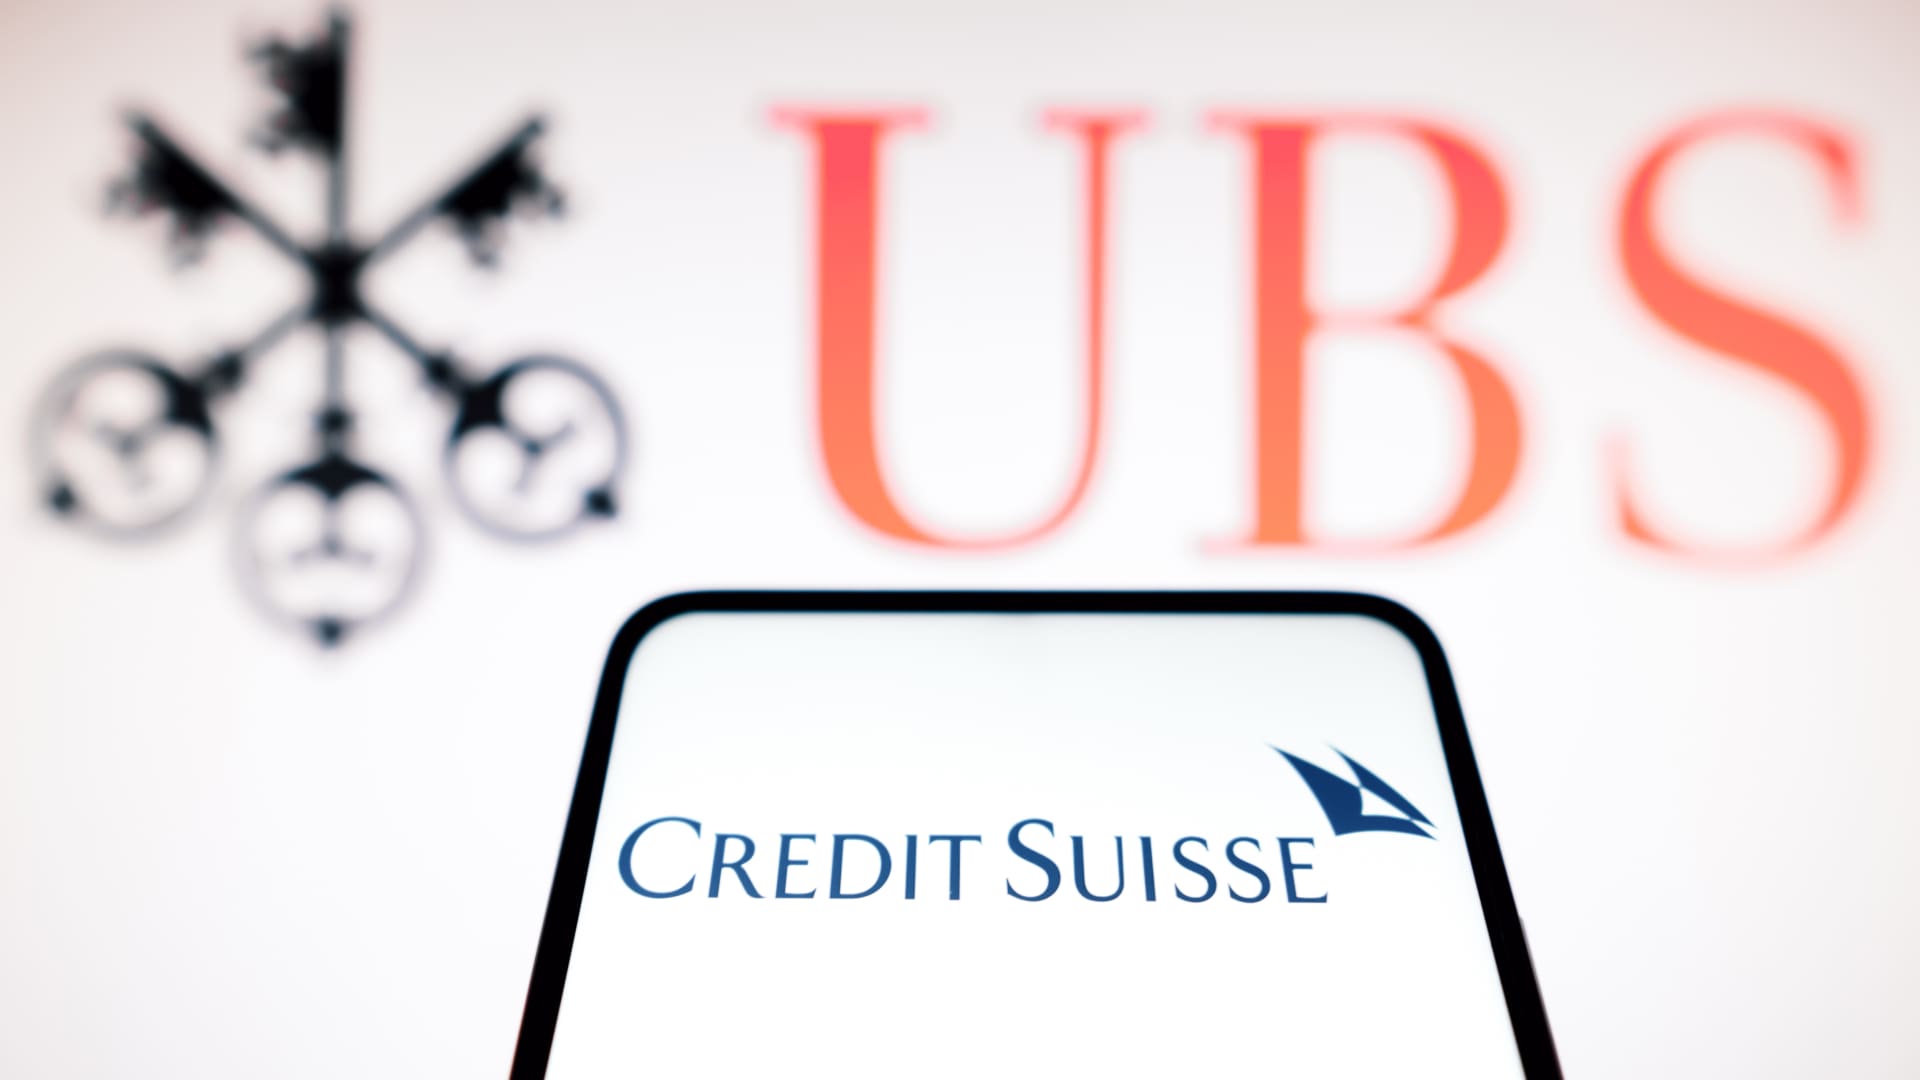 The Credit Suisse logo seen displayed on a smartphone and UBS logo on the background.